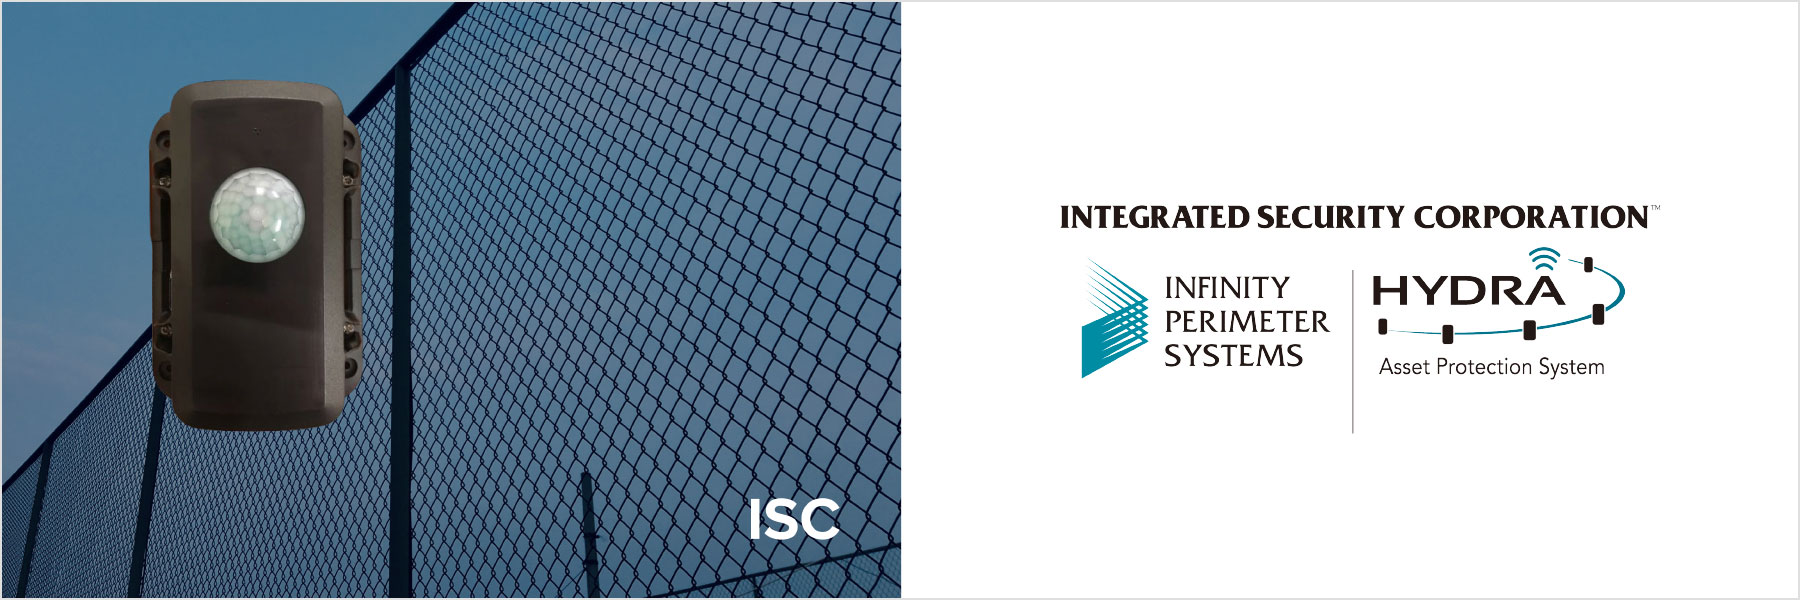 INTEGRATED SECURITY CORPORATION